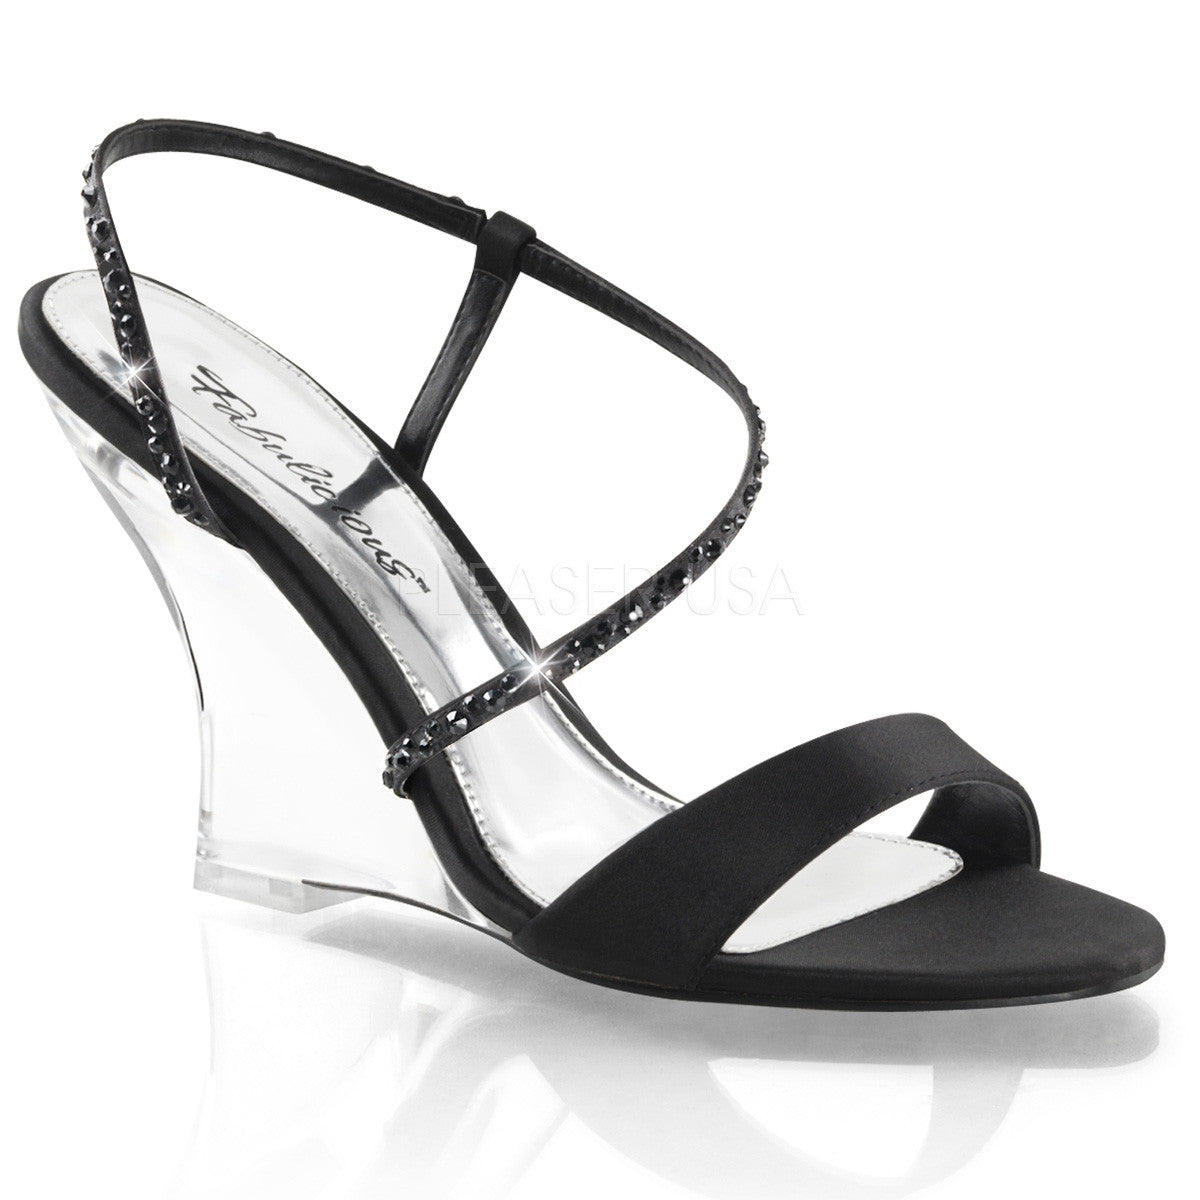 FABULICIOUS LOVELY-417 Black Satin-Clear Slingback Wedges - Shoecup.com